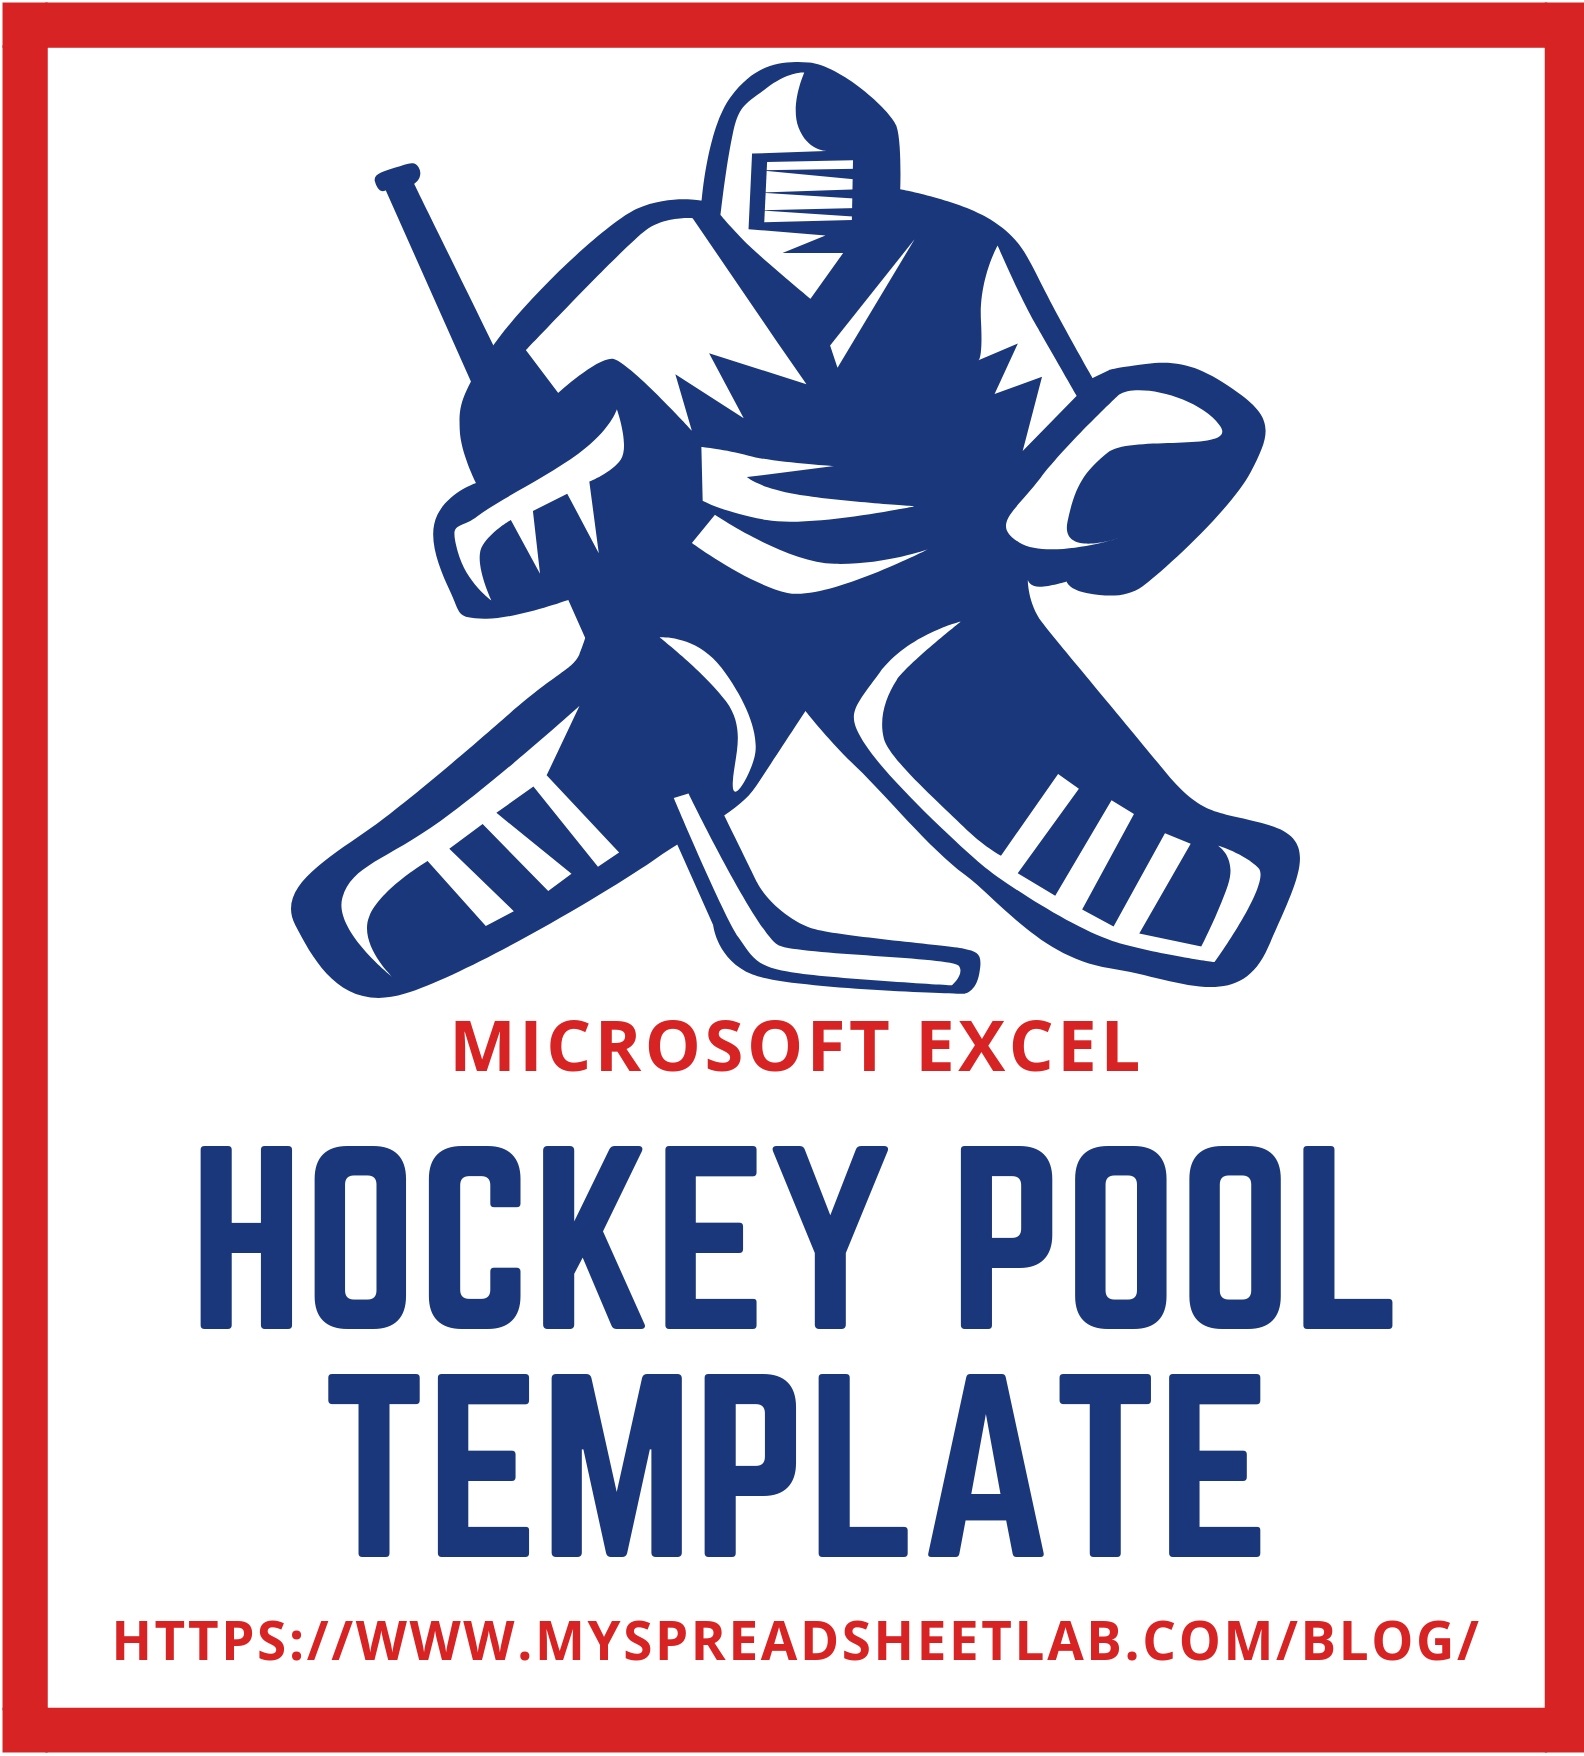 Using Microsoft Excel for your hockey pool